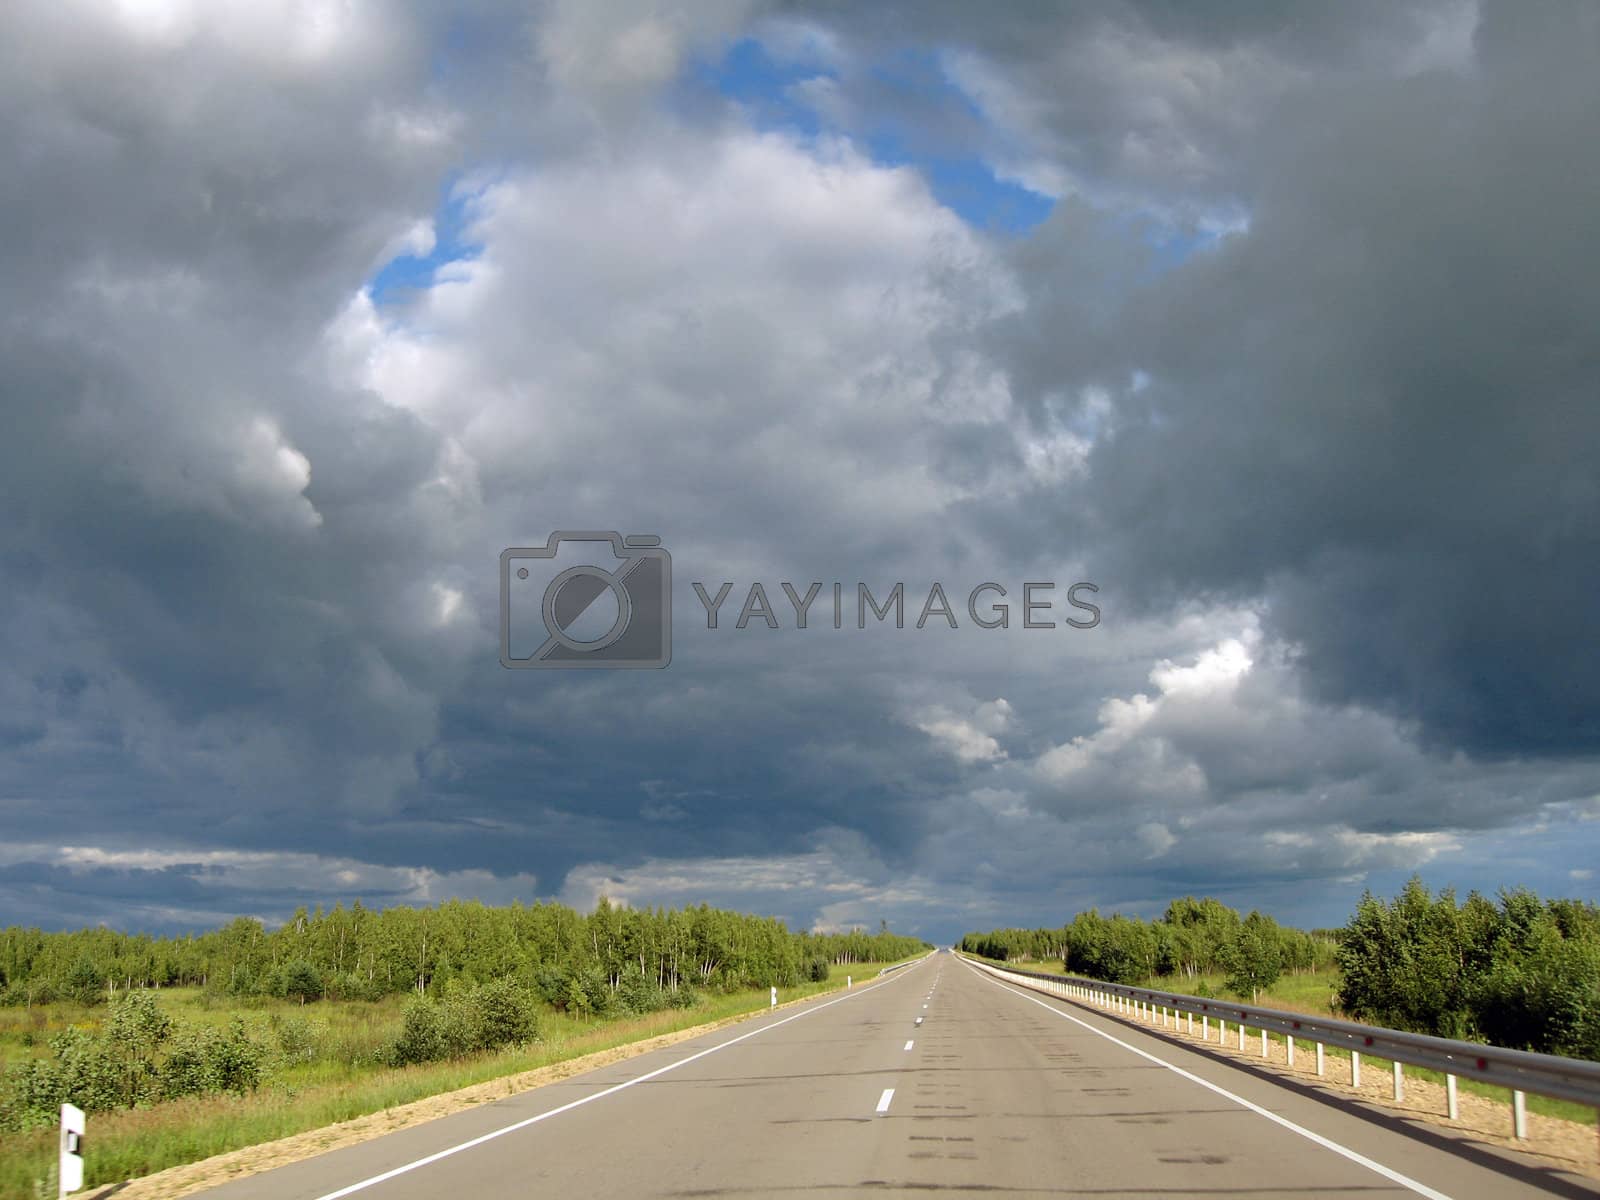 Royalty free image of Most asphalt road, against the background of clouds by aarrows